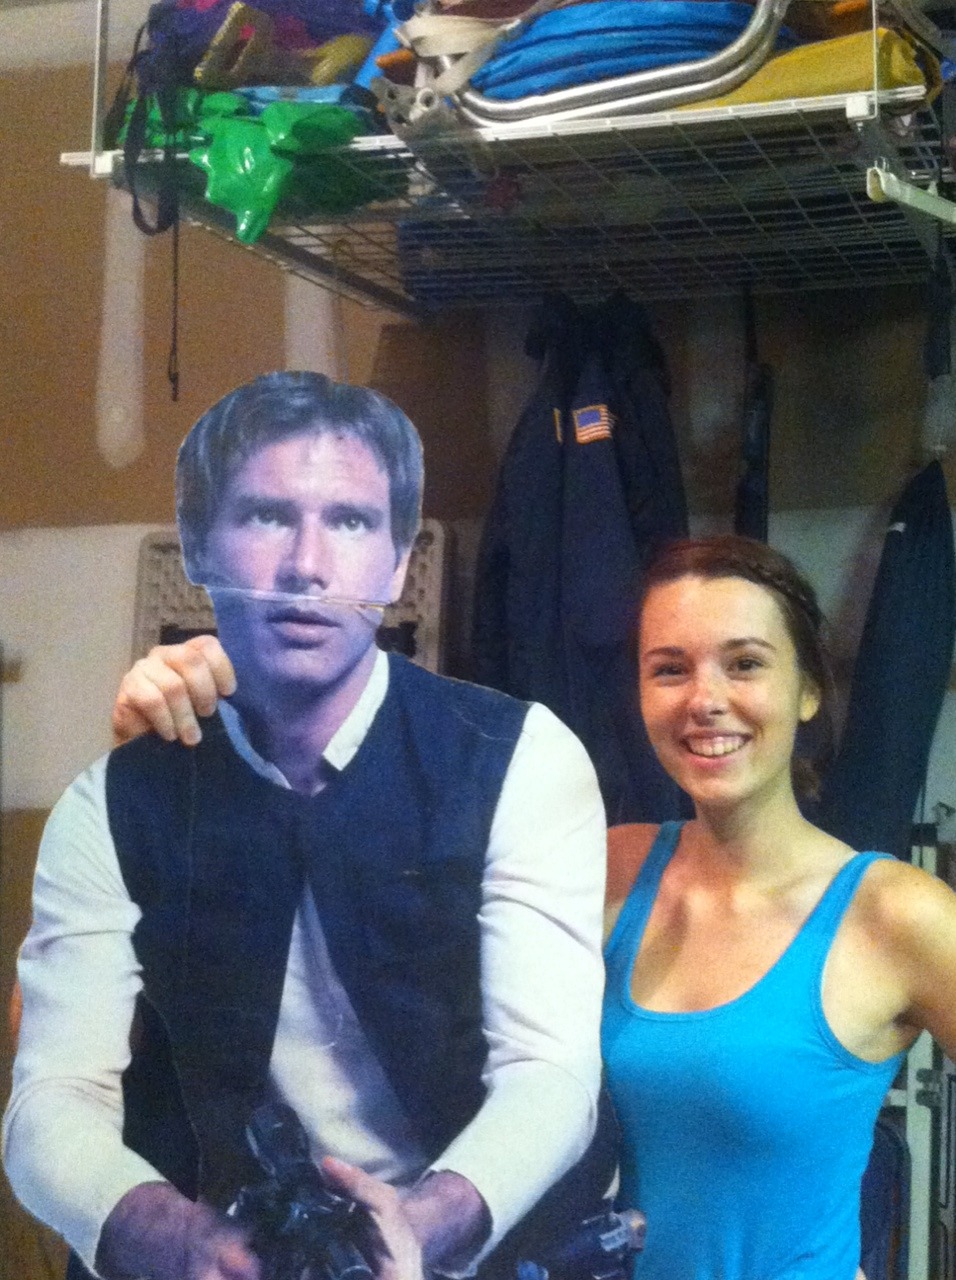 spicy-vagina-tacos:
“ spicy-vagina-tacos:
“ supernaturalbadwolf:
“ spicy-vagina-tacos:
“ its-the-dead-hipster:
“ spicy-vagina-tacos:
“ I met Luke skywalker today (: I love Star Trek!
”
Dumb bitch
”
Don’t be rude….. Why can’t I be a Trekkie and proud?...